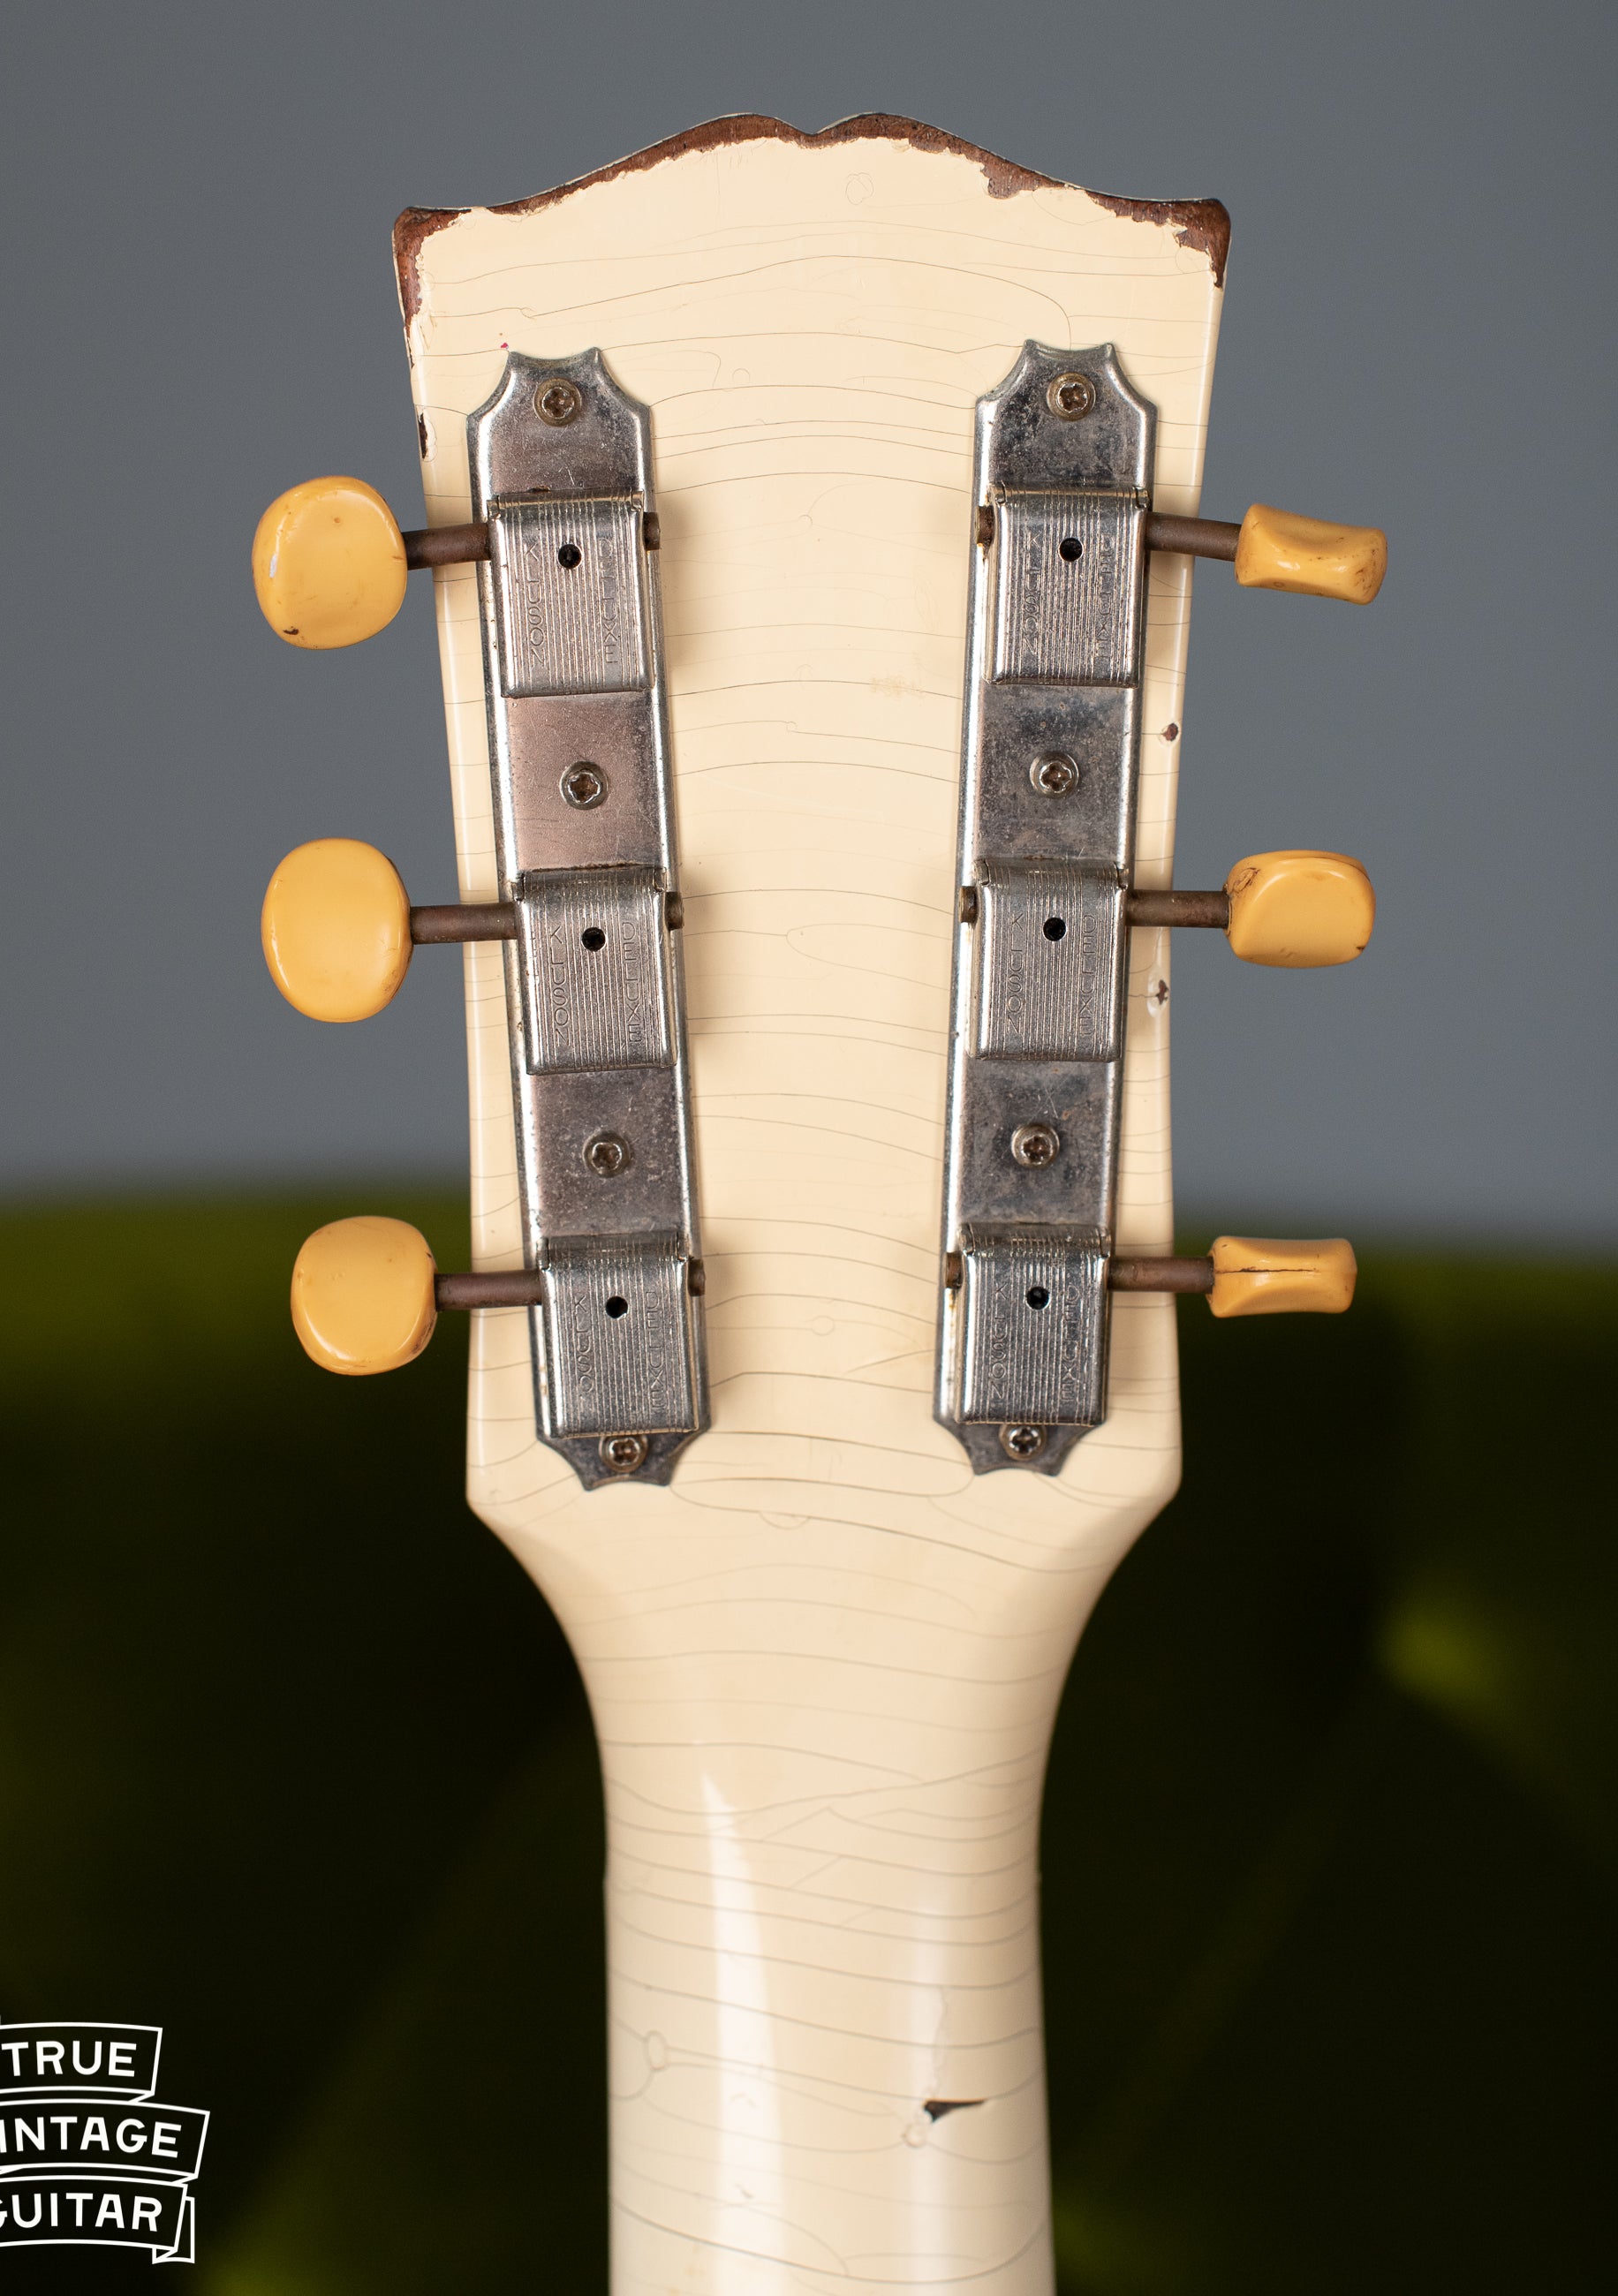 Double line Kluson tuners, 1965 Gibson SG TV